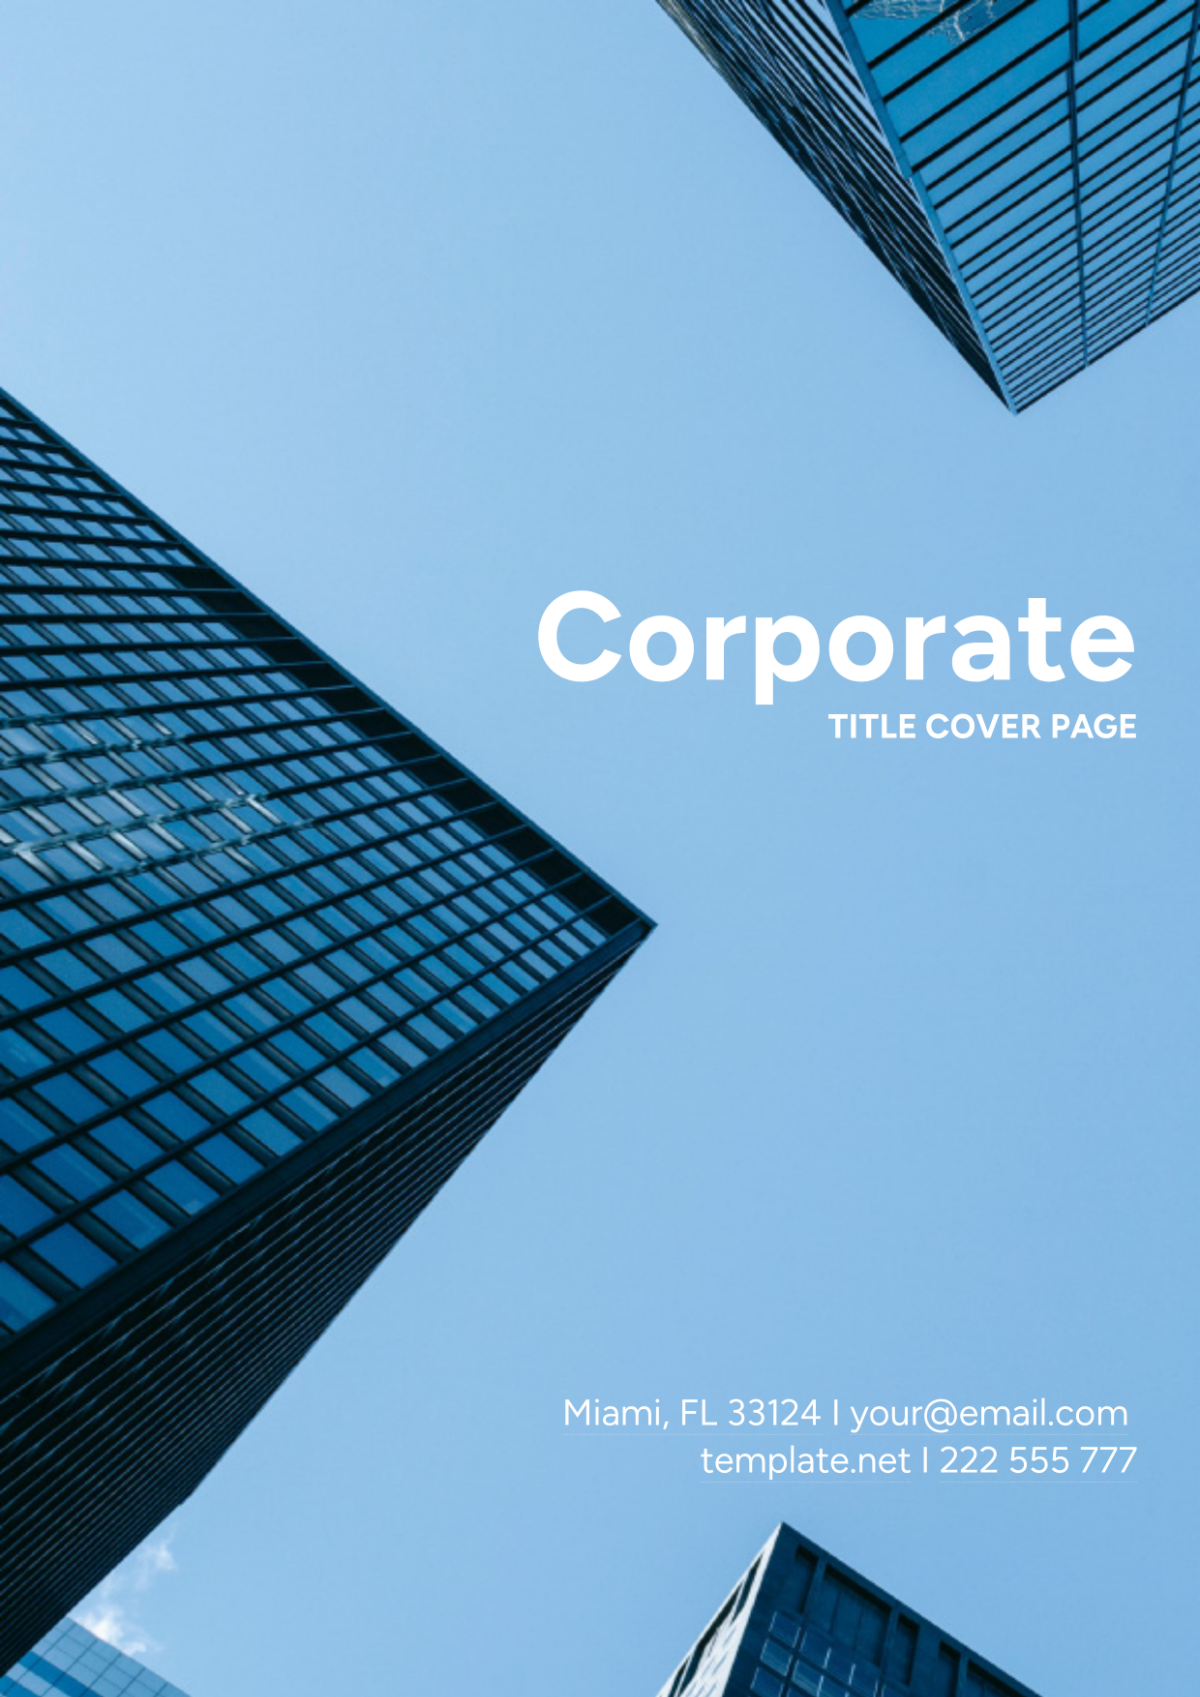 Corporate Title Cover Page Template